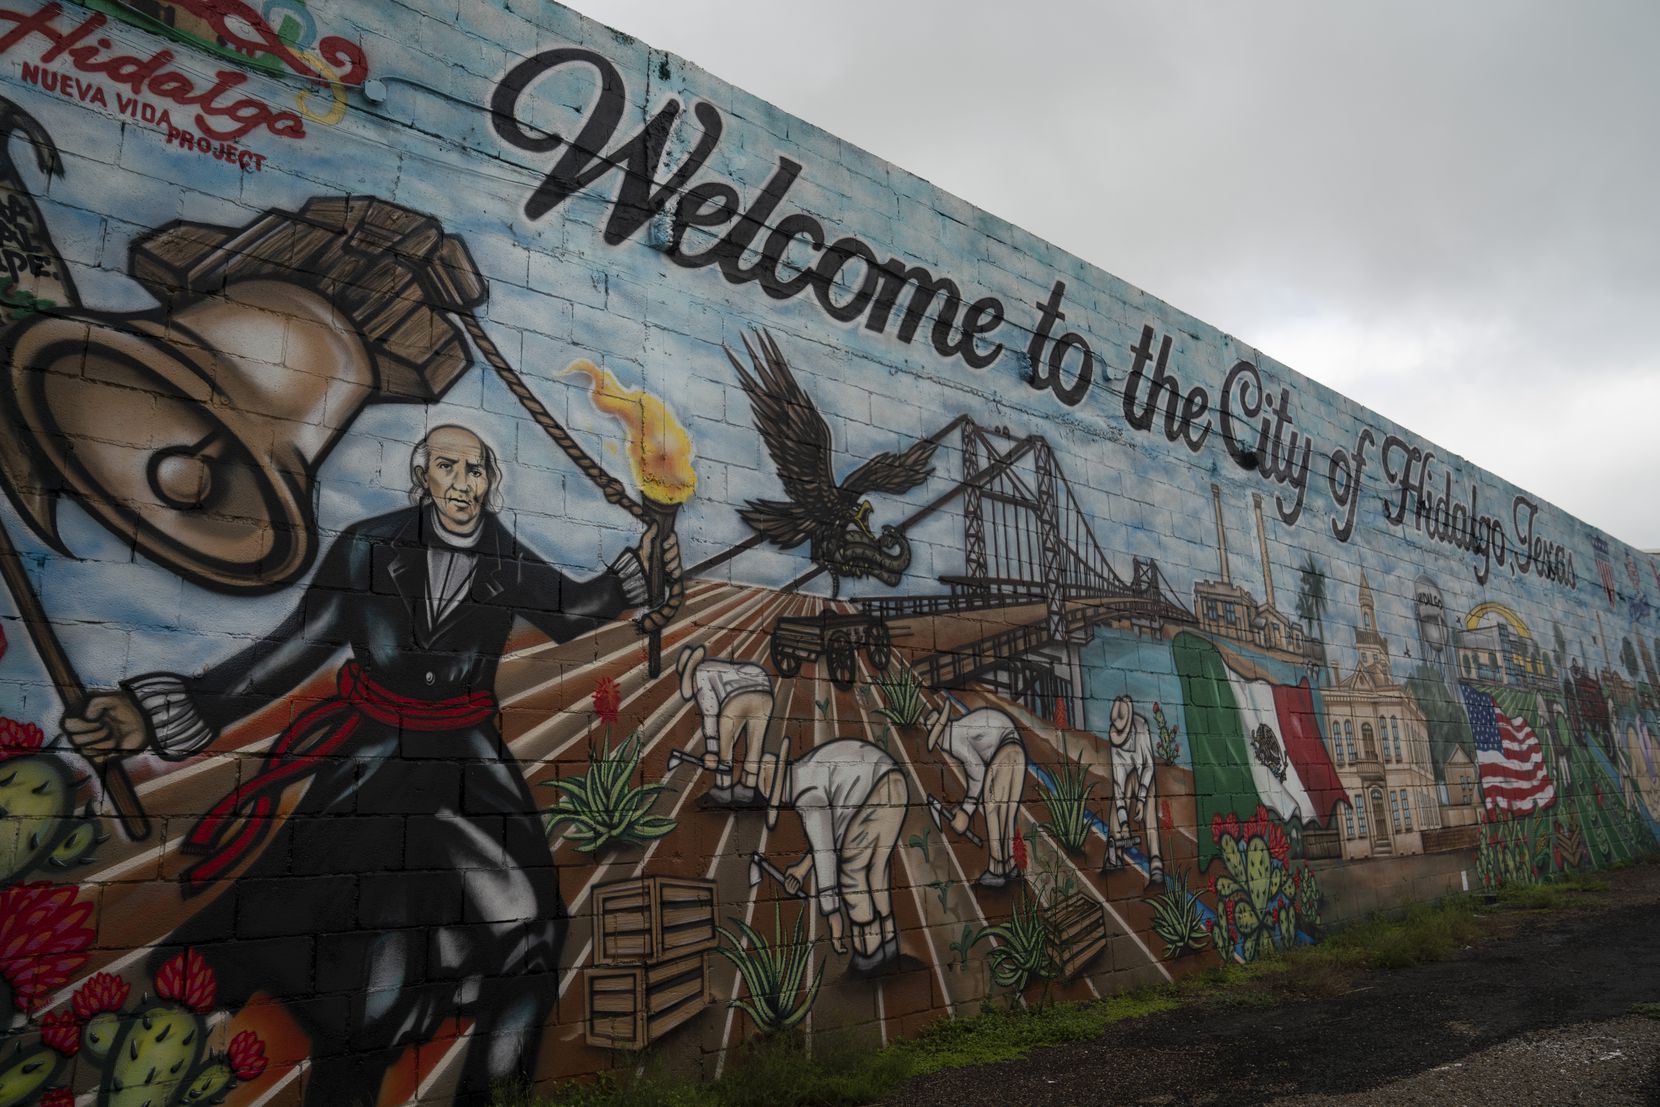 A mural in Hidalgo pays homage to the binational pride of the U.S.-Mexico region.